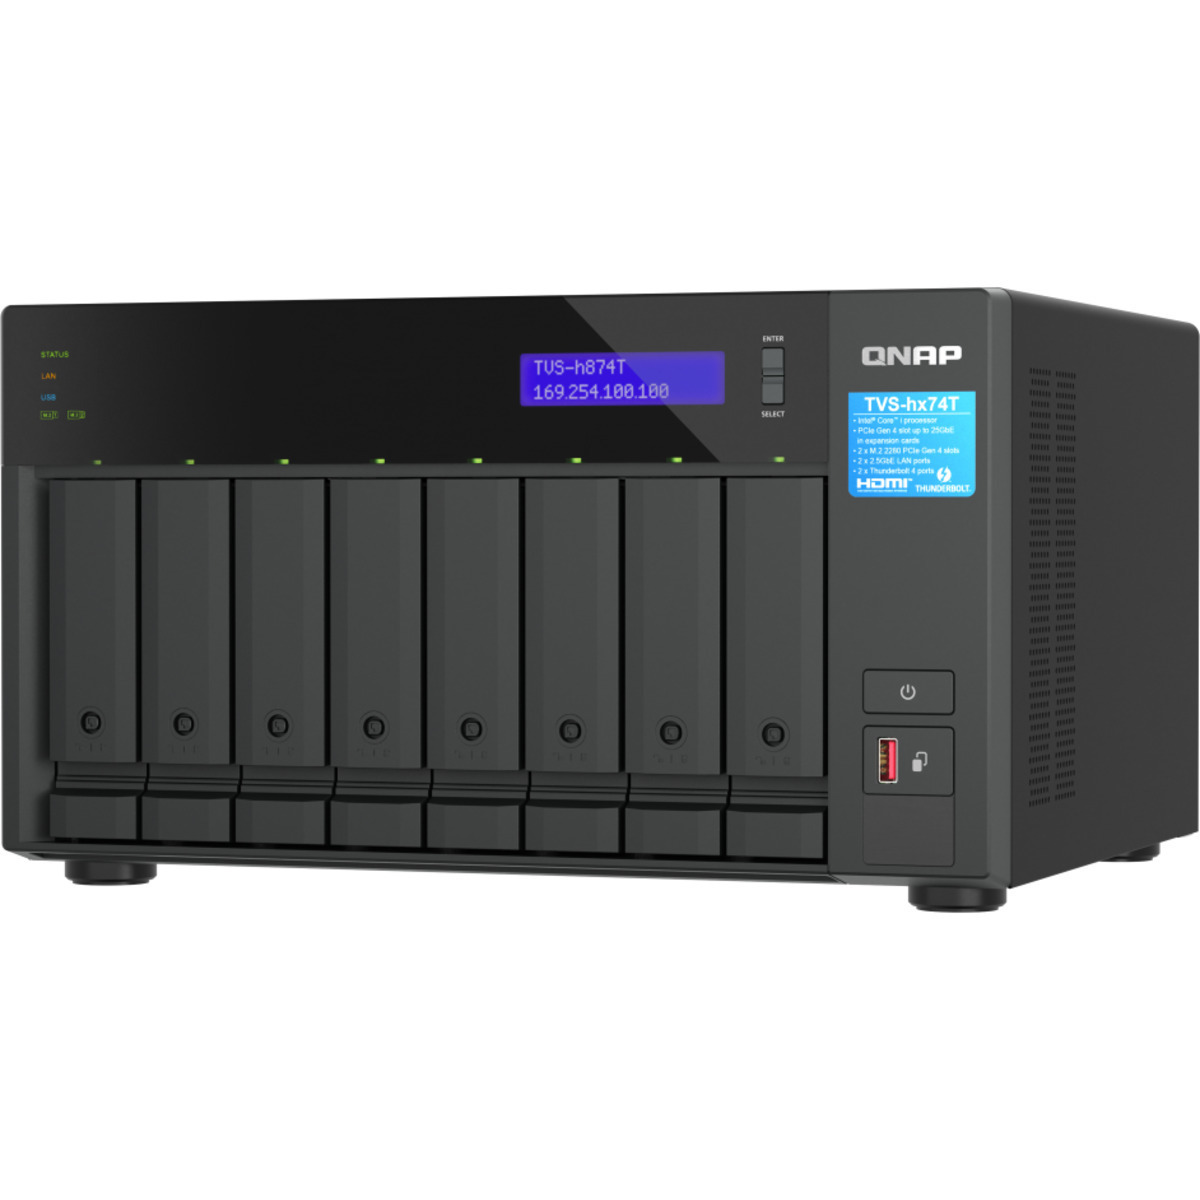 QNAP TVS-h874T Core i7 Thunderbolt 4 12tb 8-Bay Desktop Multimedia / Power User / Business DAS-NAS - Combo Direct + Network Storage Device 6x2tb Western Digital Red Plus WD20EFZX 3.5 5400rpm SATA 6Gb/s HDD NAS Class Drives Installed - Burn-In Tested TVS-h874T Core i7 Thunderbolt 4